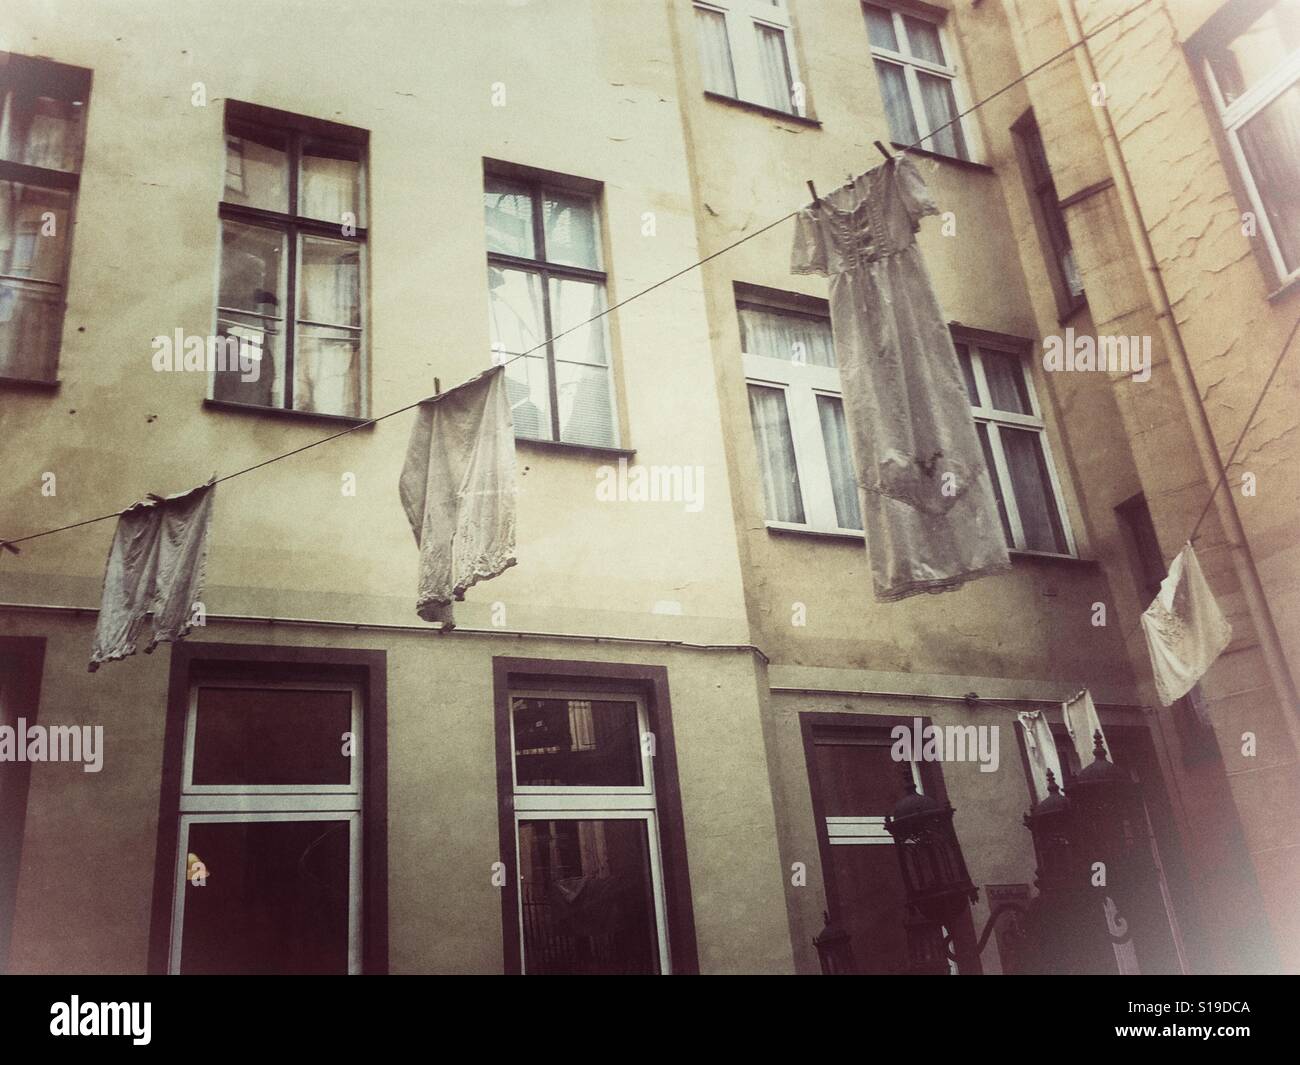 Vintage clothes hanging out to get dried in front of a building, old laundry Stock Photo